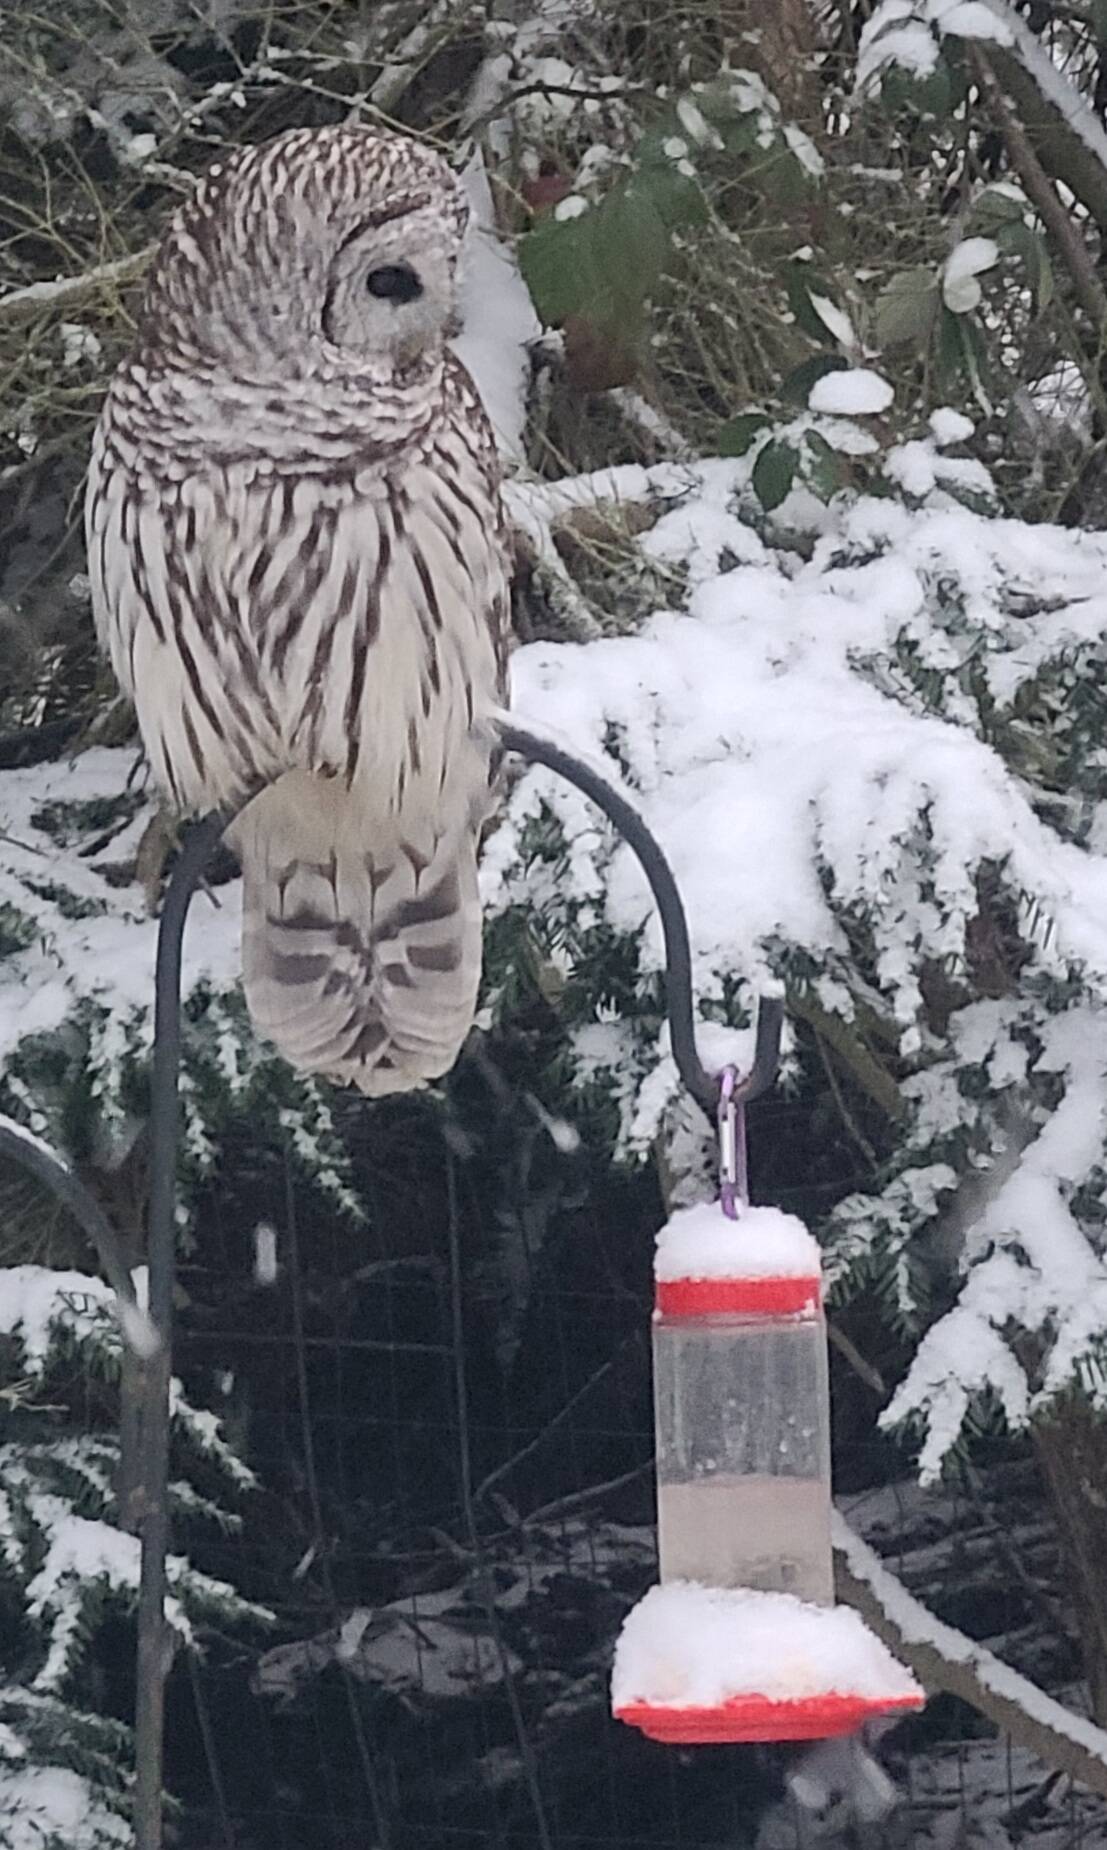 Photo by Diane Jhueck
A barred owl visits the backyard of South Whidbey resident Diane Jhueck Sunday during the snowstorm.